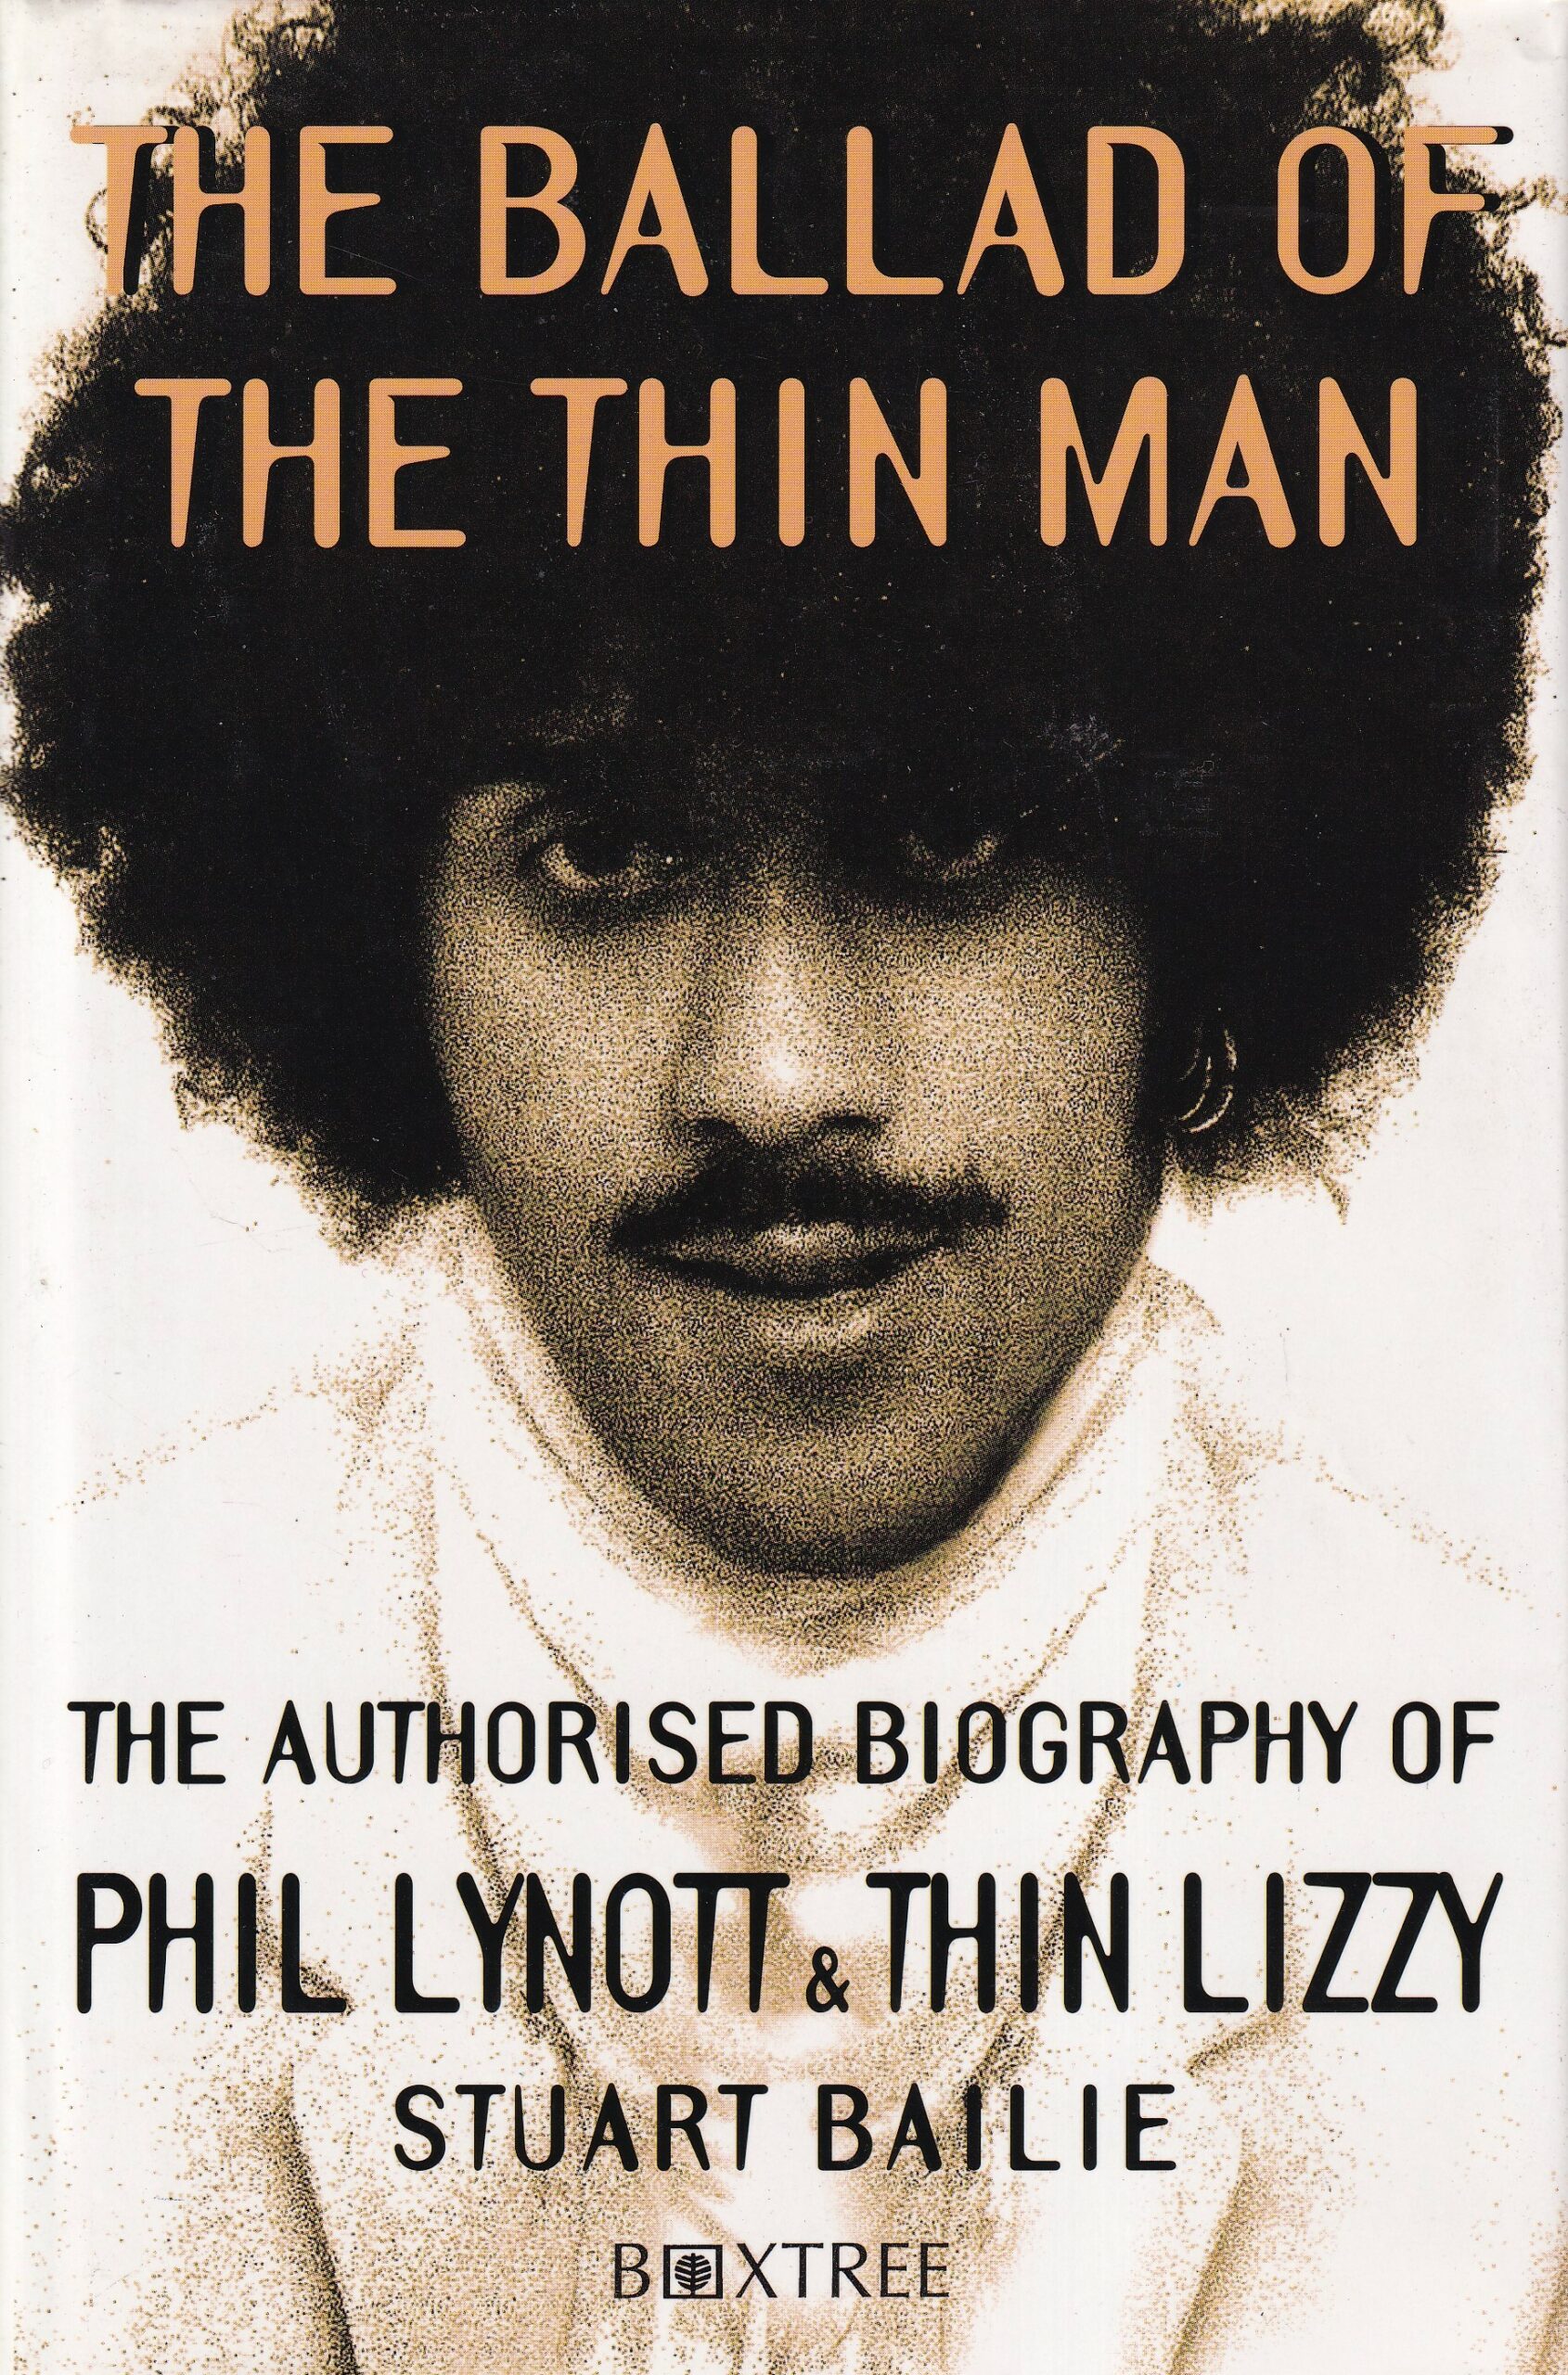 The Ballad of the Thin Man: The Authorised Biography of Phil Lynott and Thin Lizzy by Stuart Baile